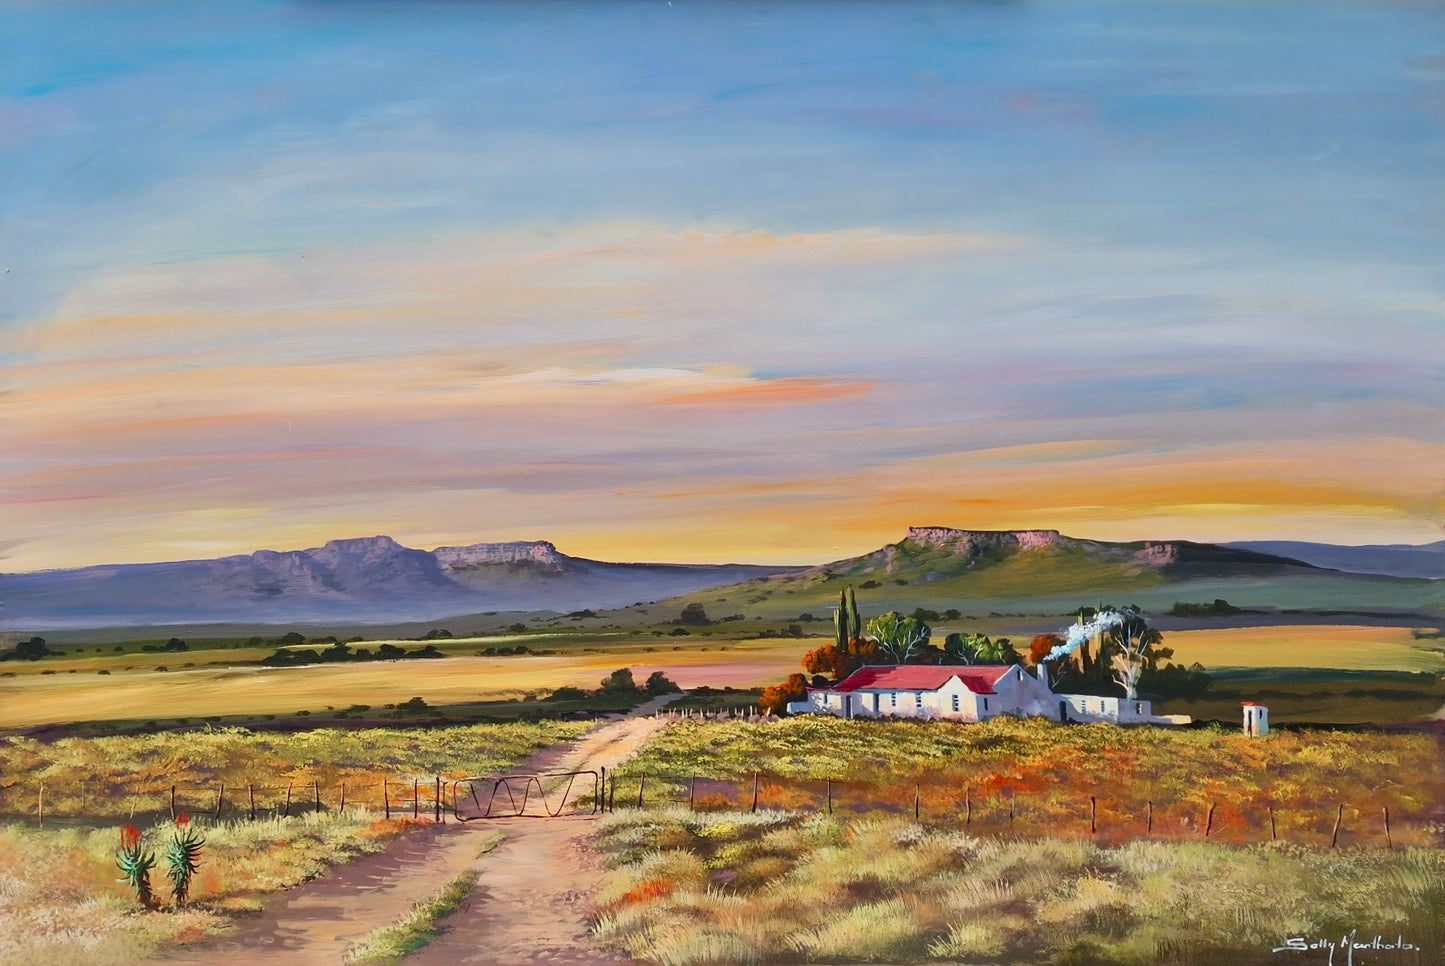 Print on Canvas - In the Middle of Nowhere 1 by Solly Manthata